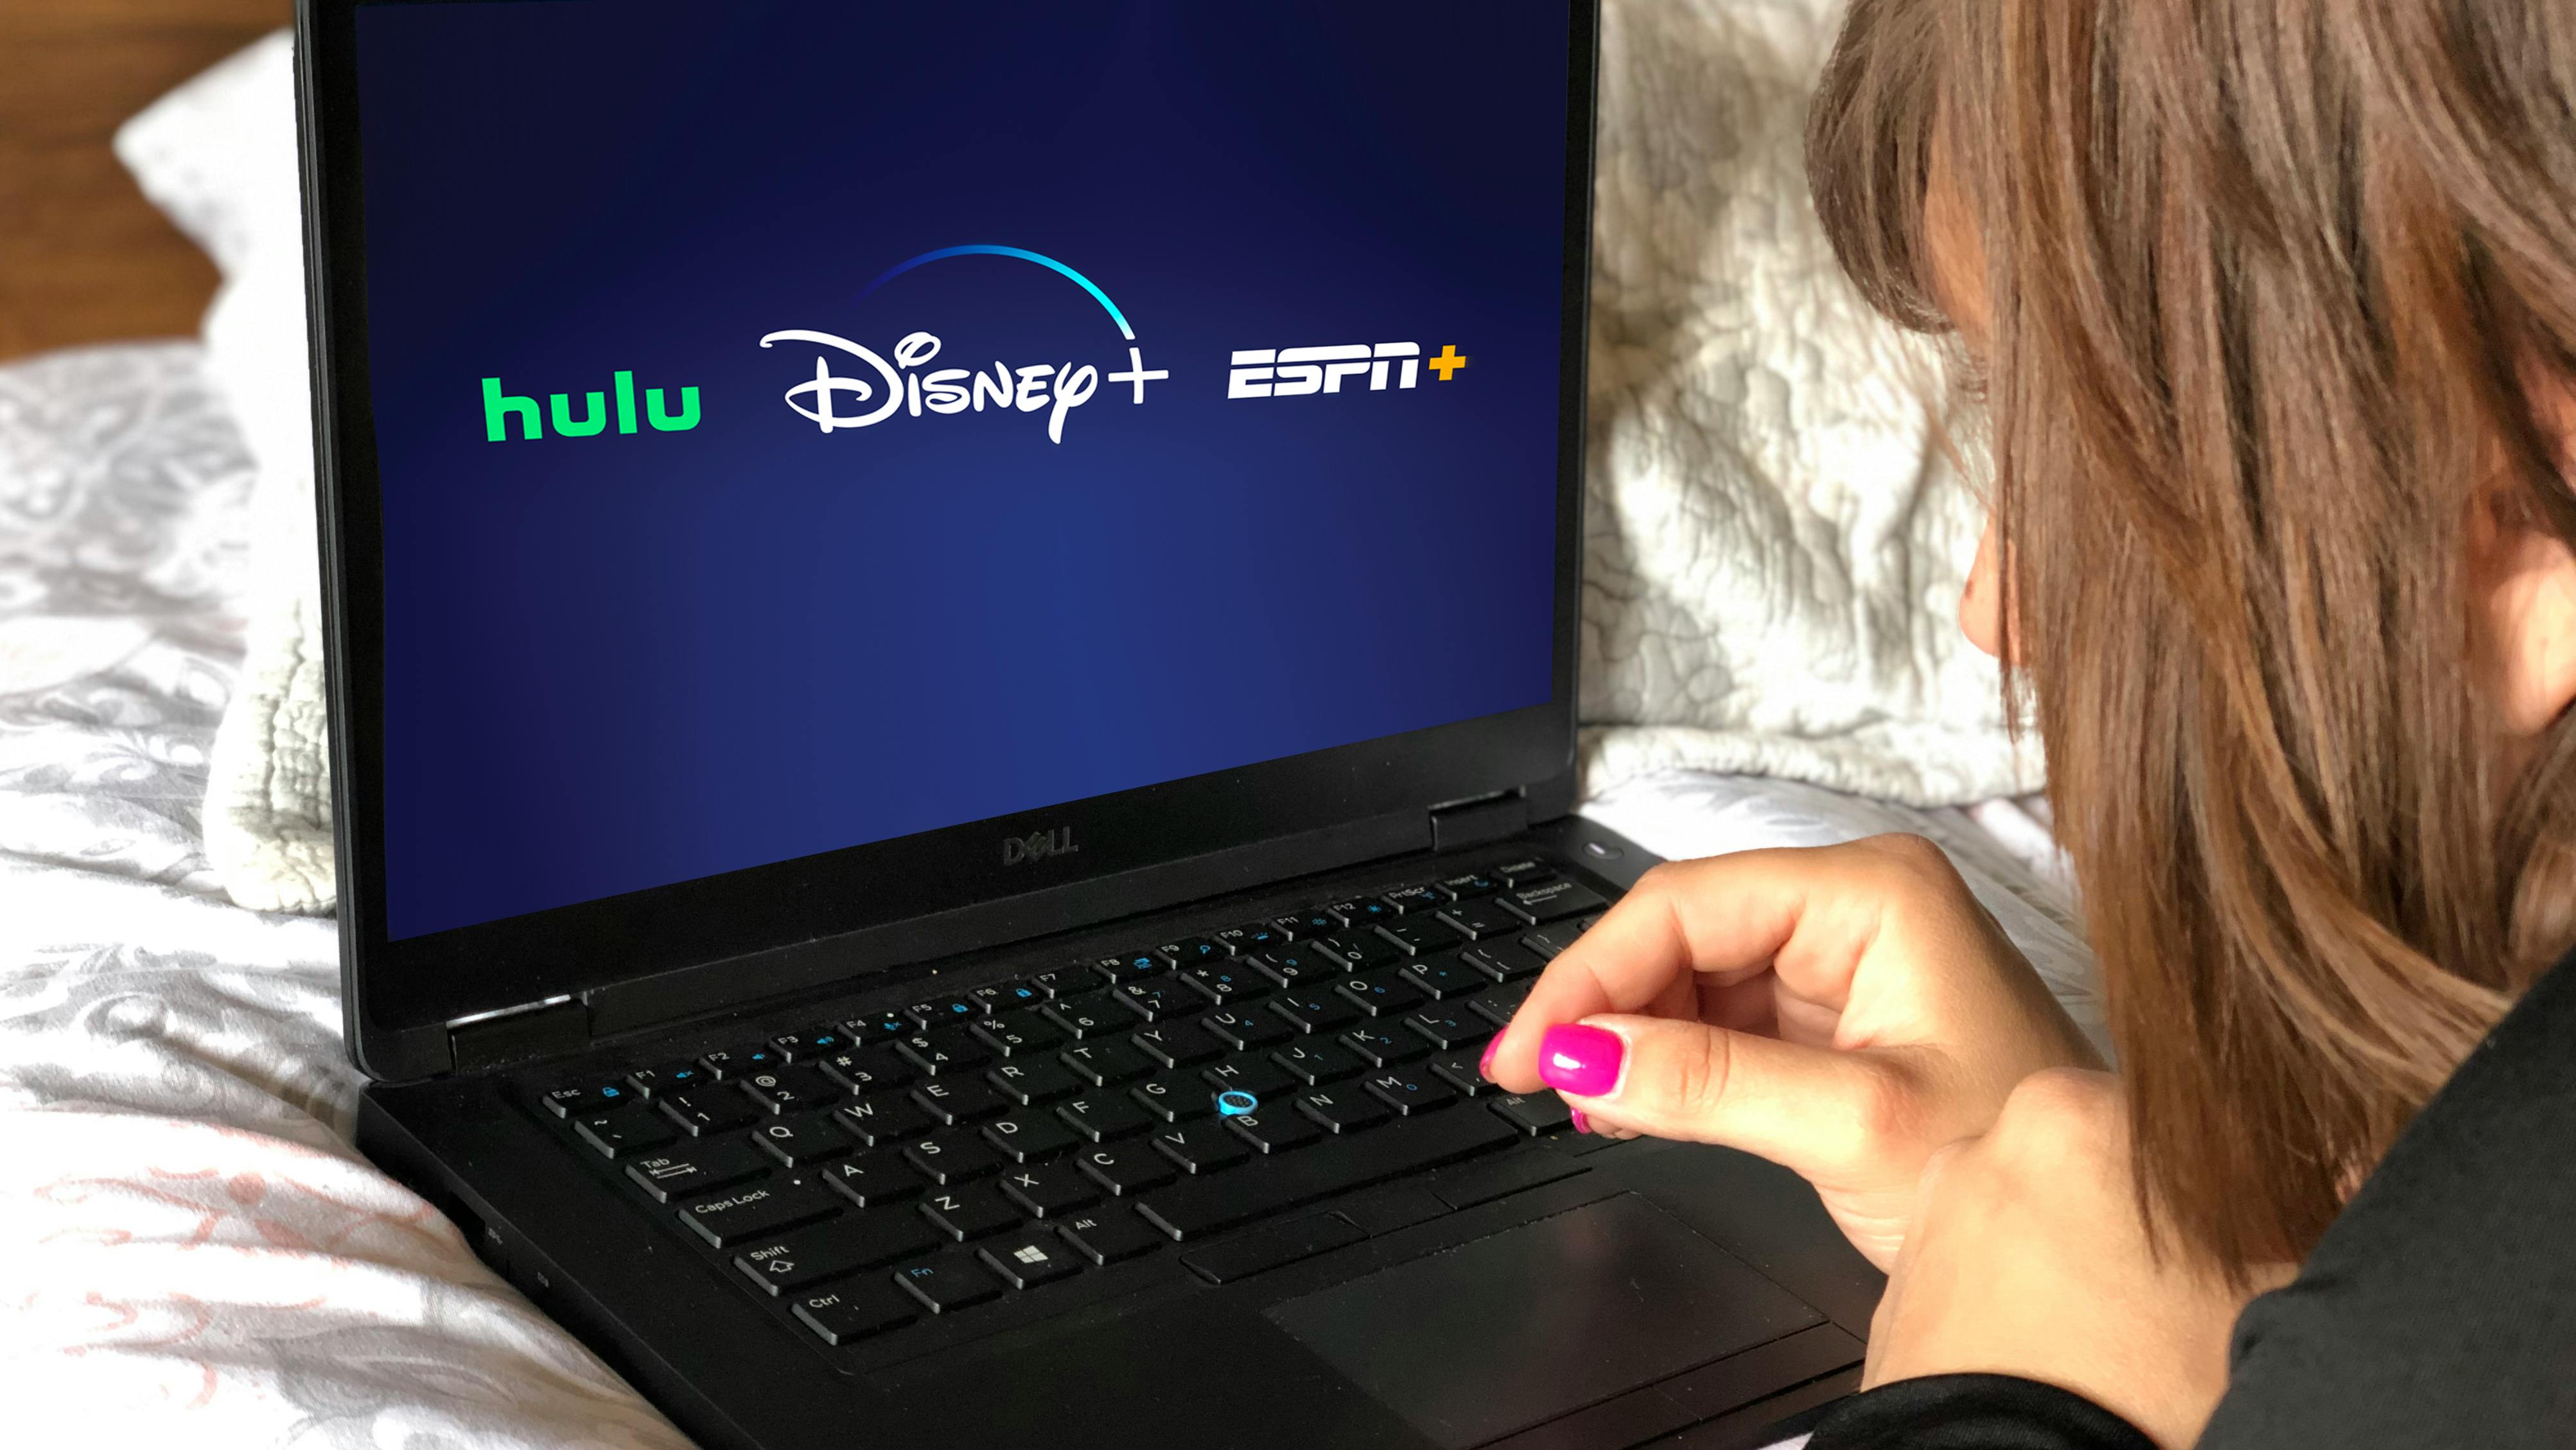 someone looking at laptop with Disney plus hulu and espn